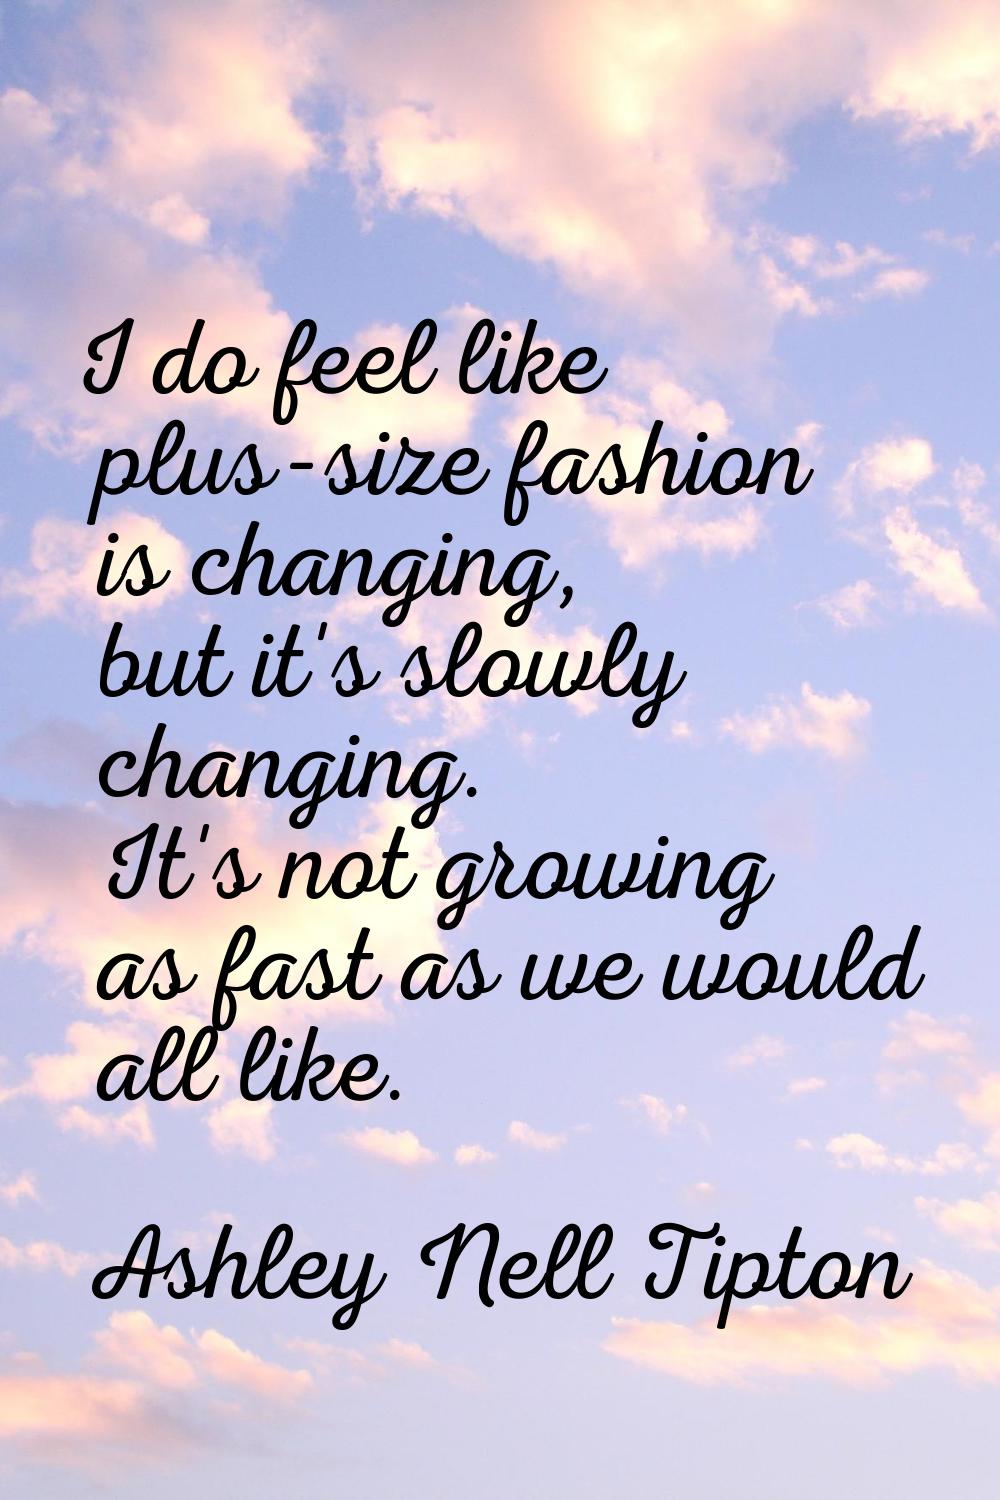 I do feel like plus-size fashion is changing, but it's slowly changing. It's not growing as fast as